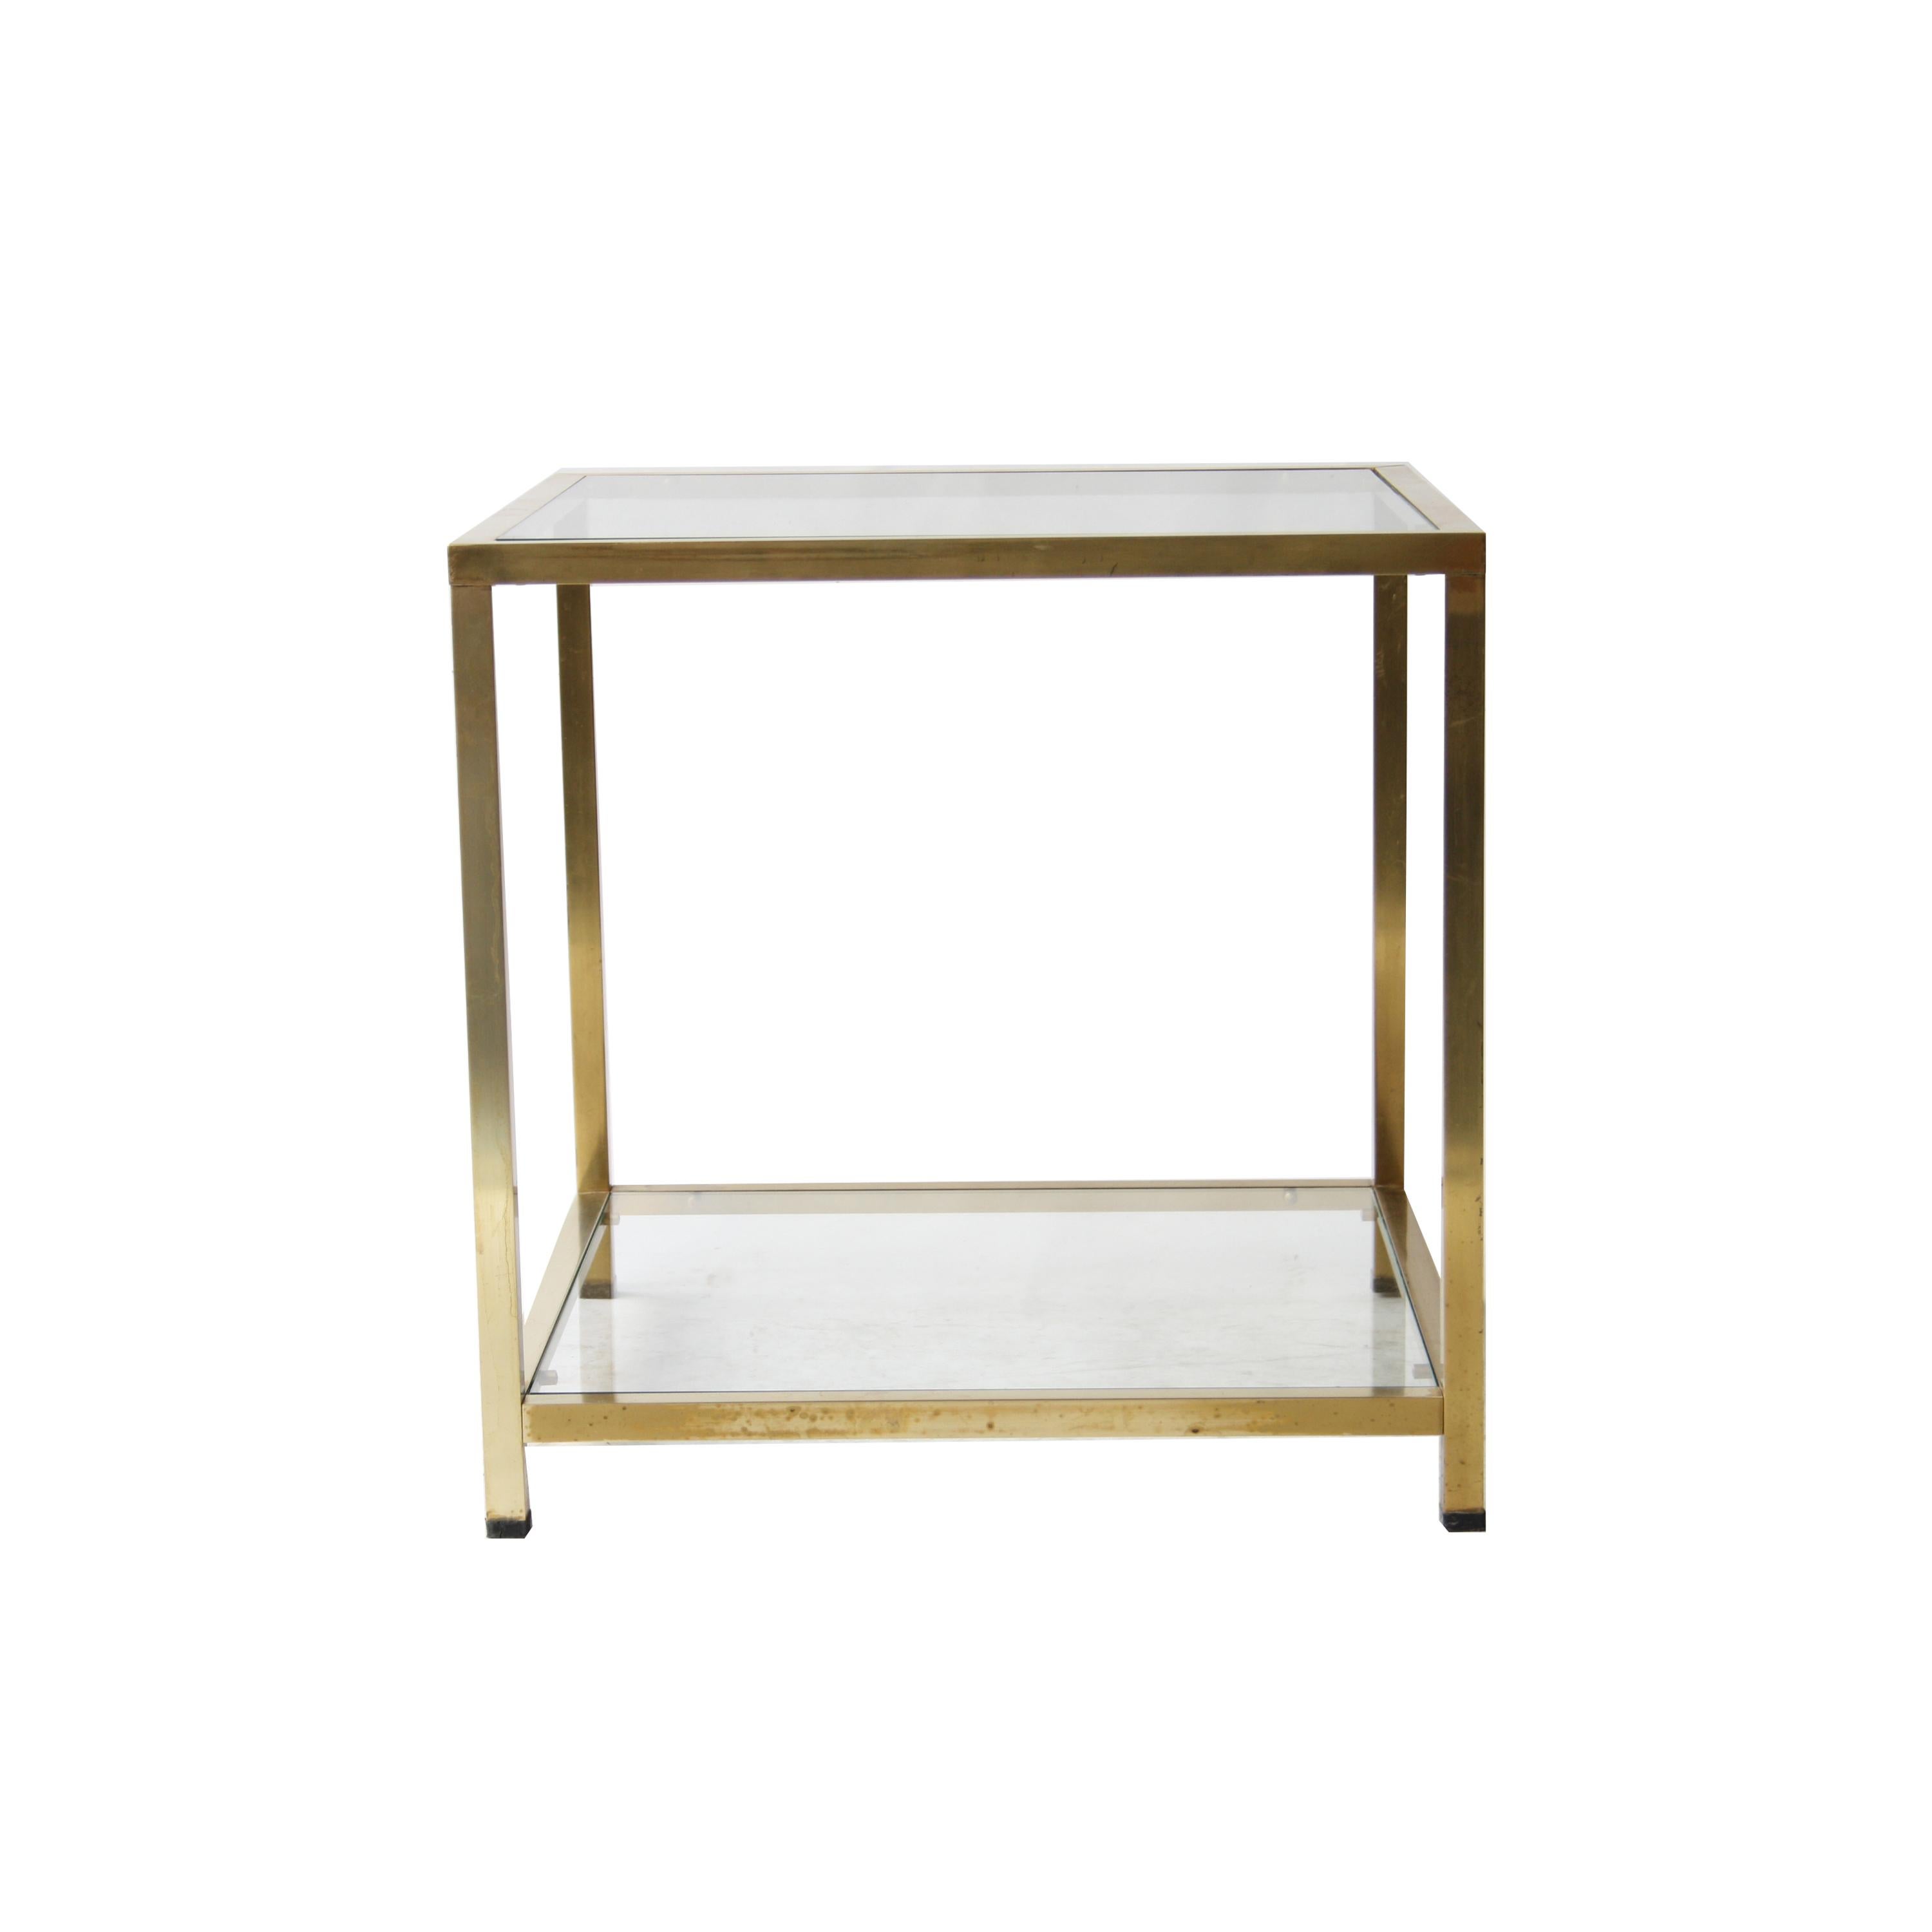 Side table with structure made of brass, with glass top.